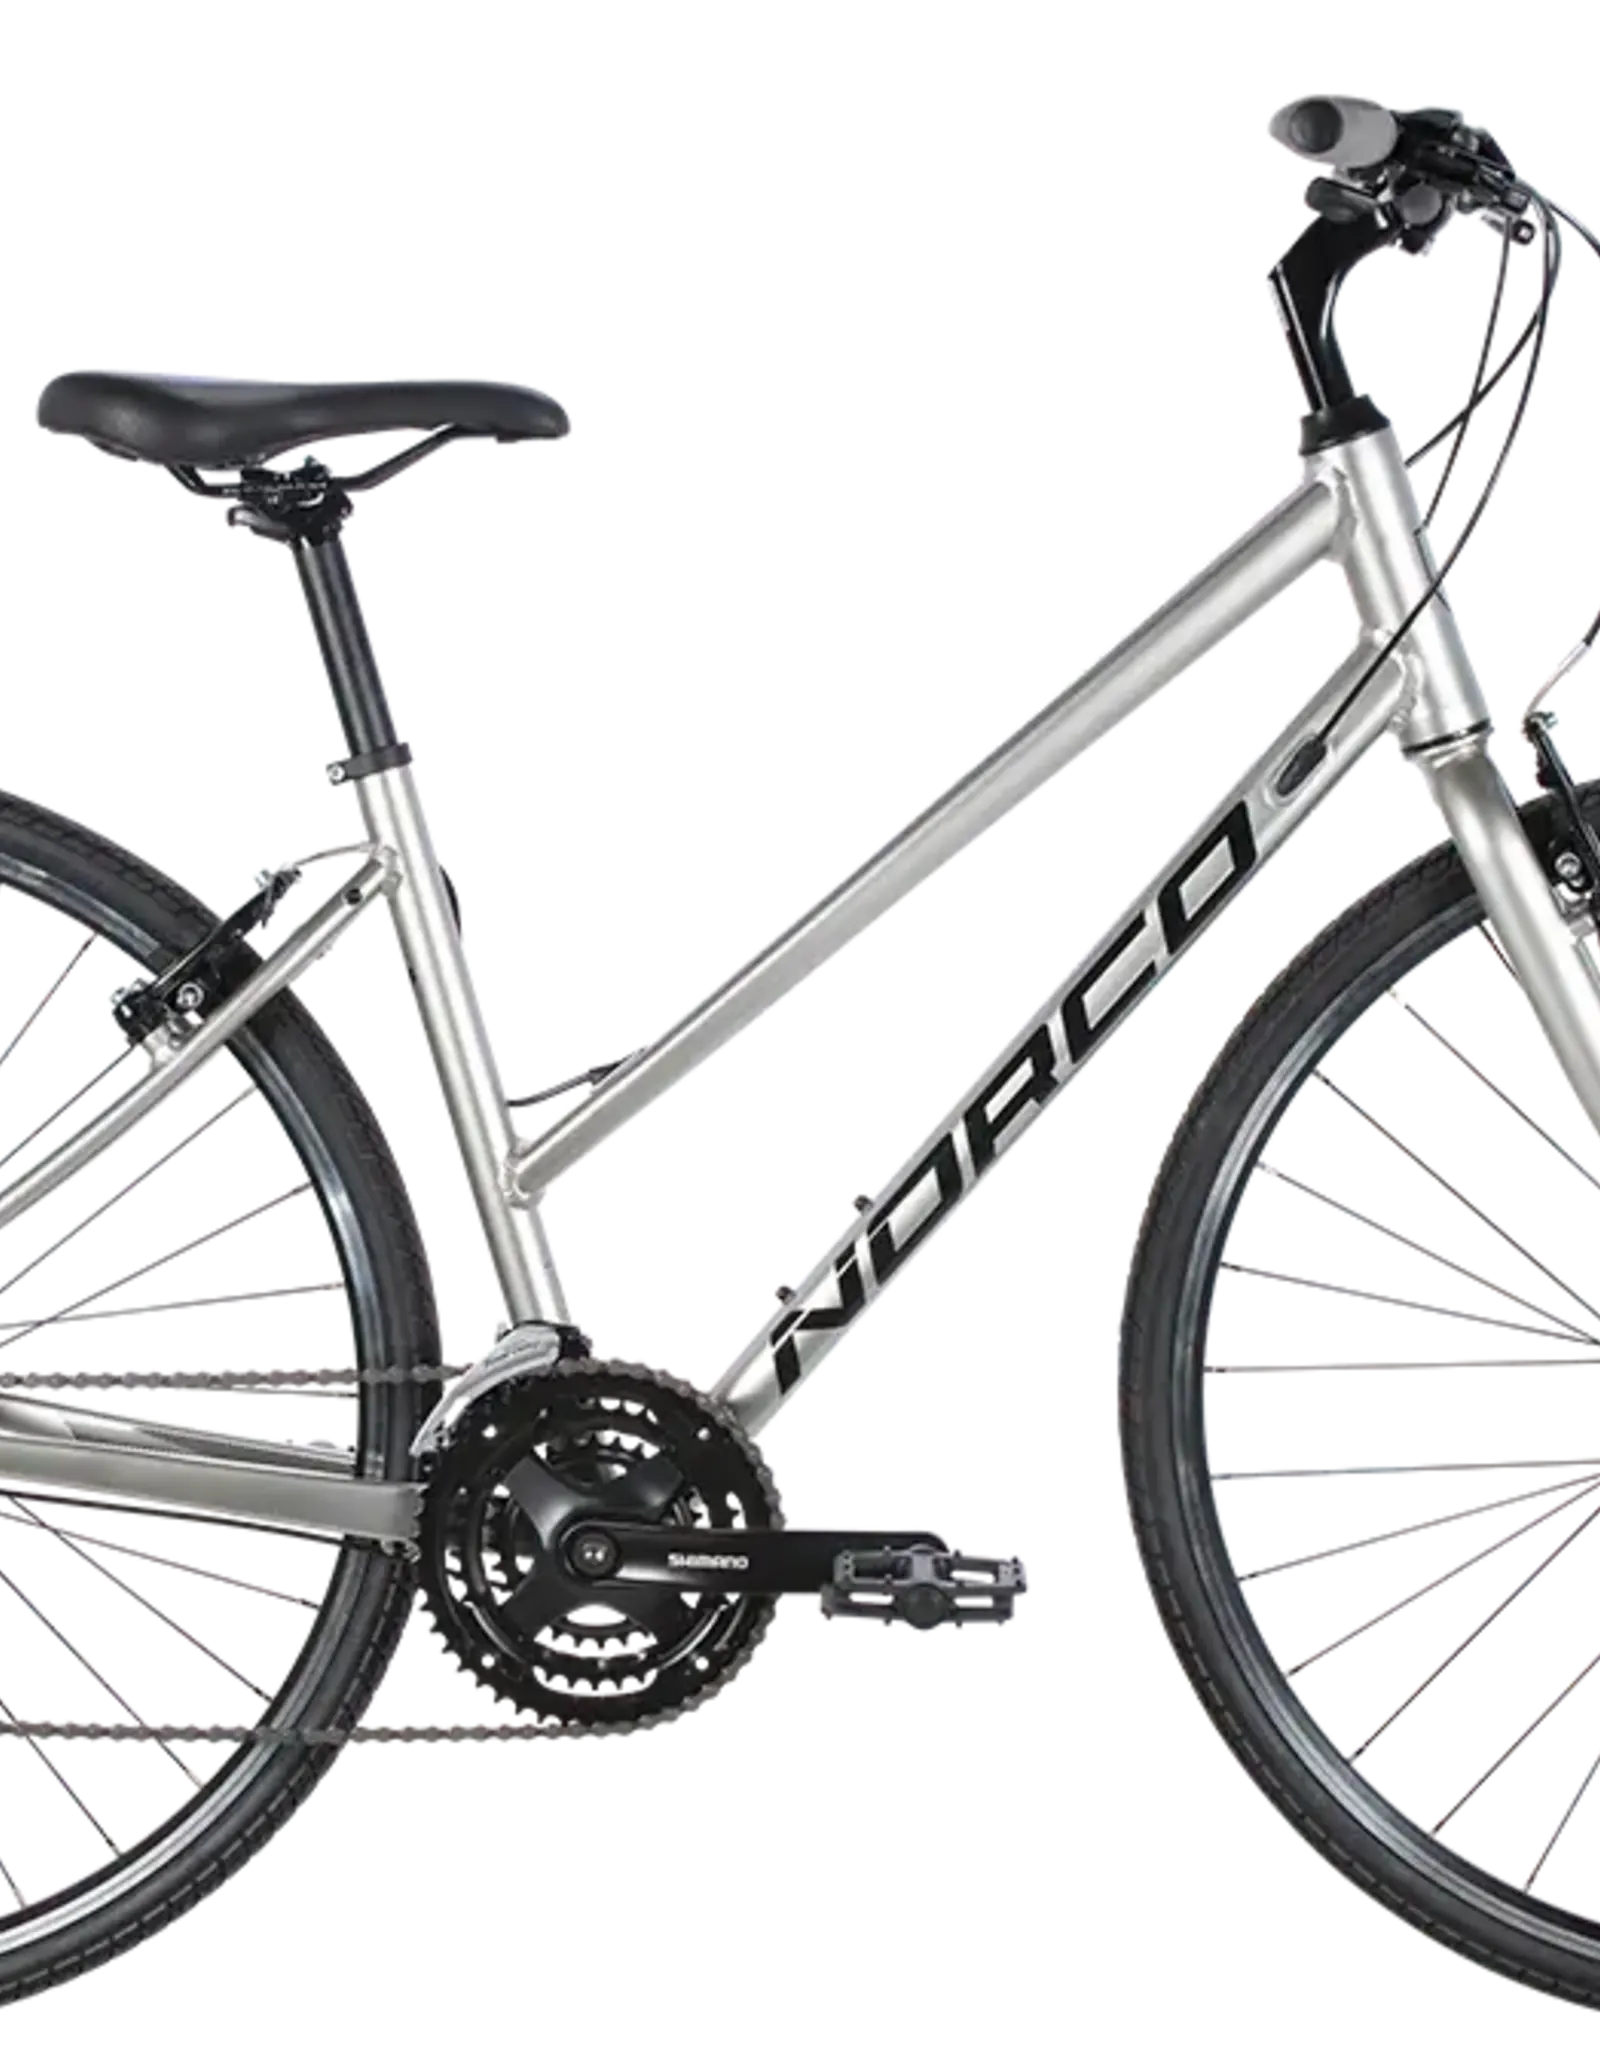 NORCO Norco VFR 2 ST